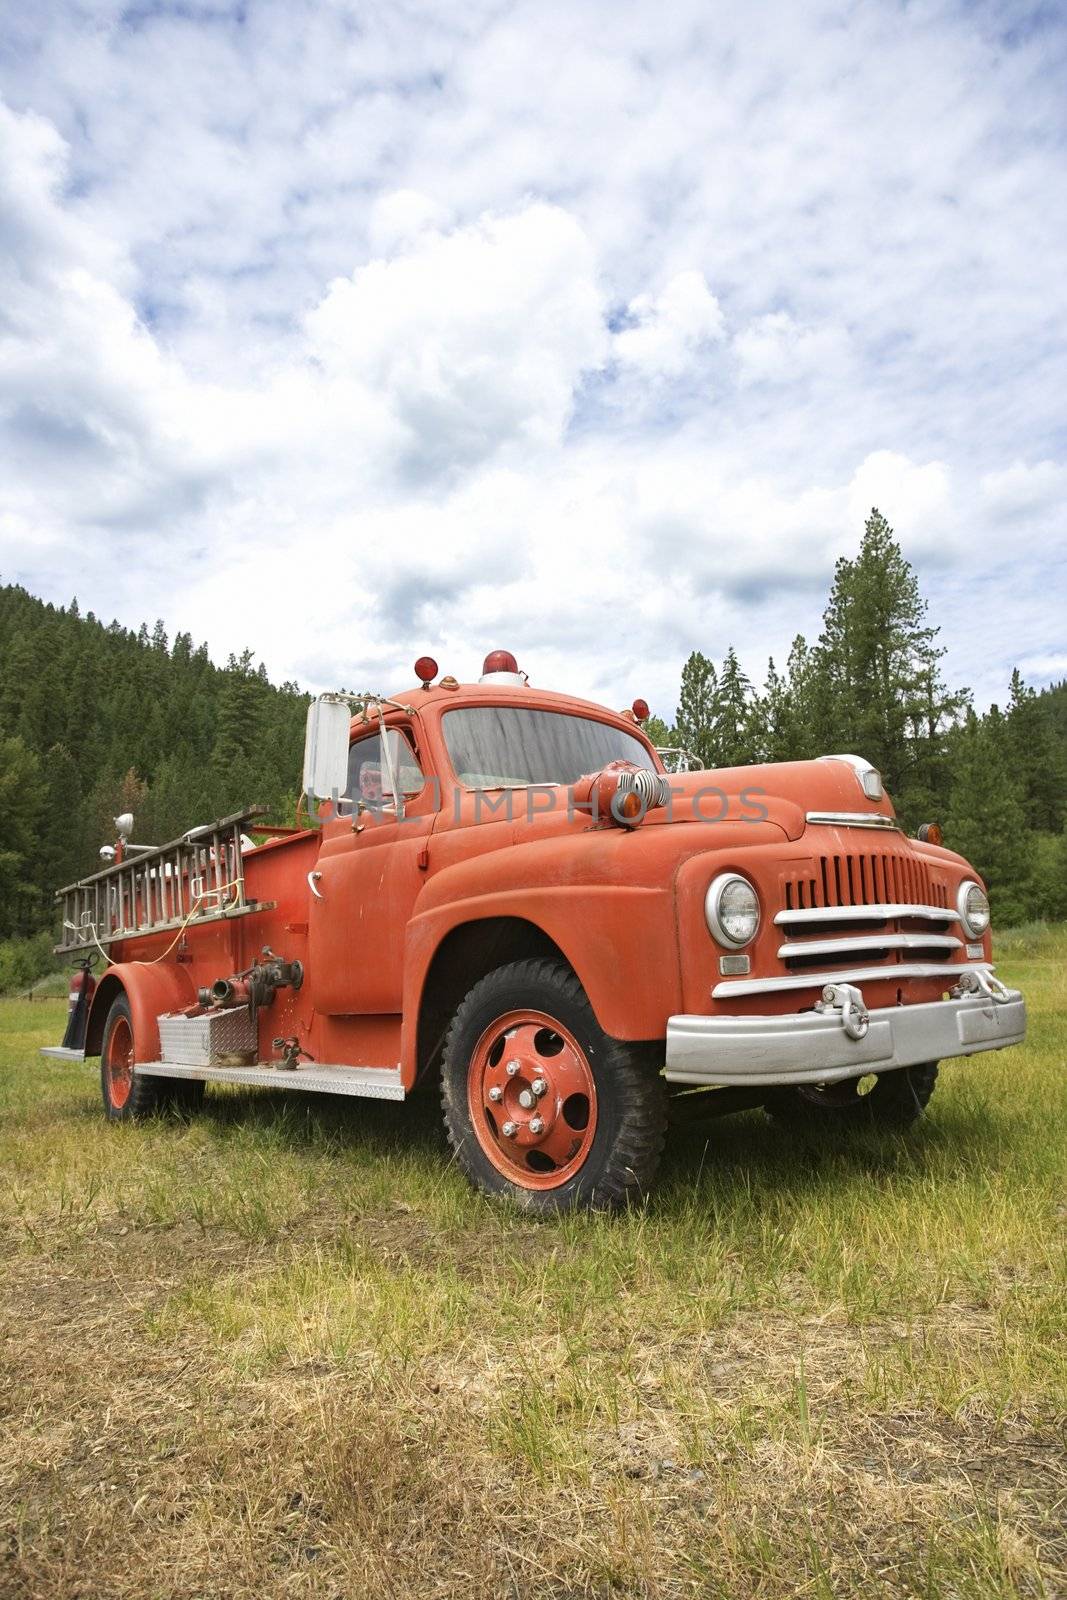 Low angle view of old fire truck in field.